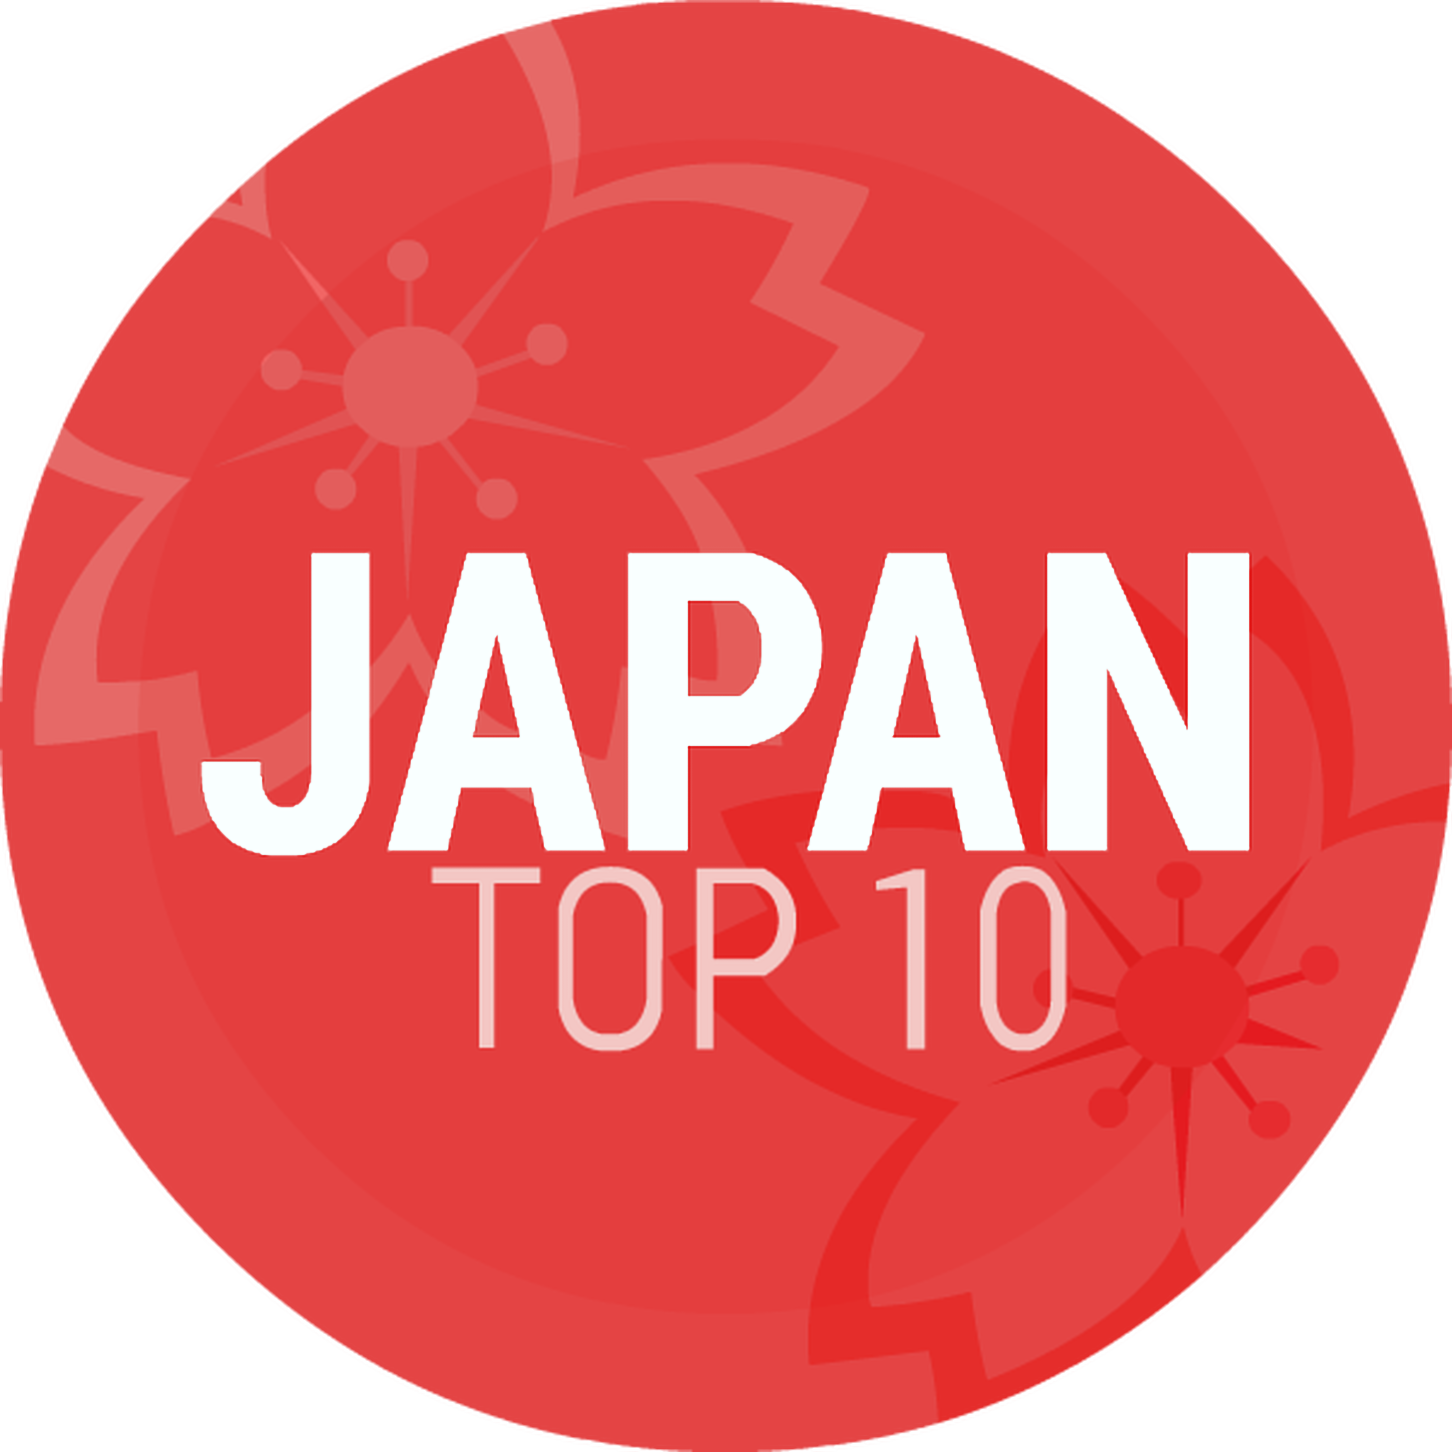 Episode 30: Japan Top 10 Early March 2014 Countdown